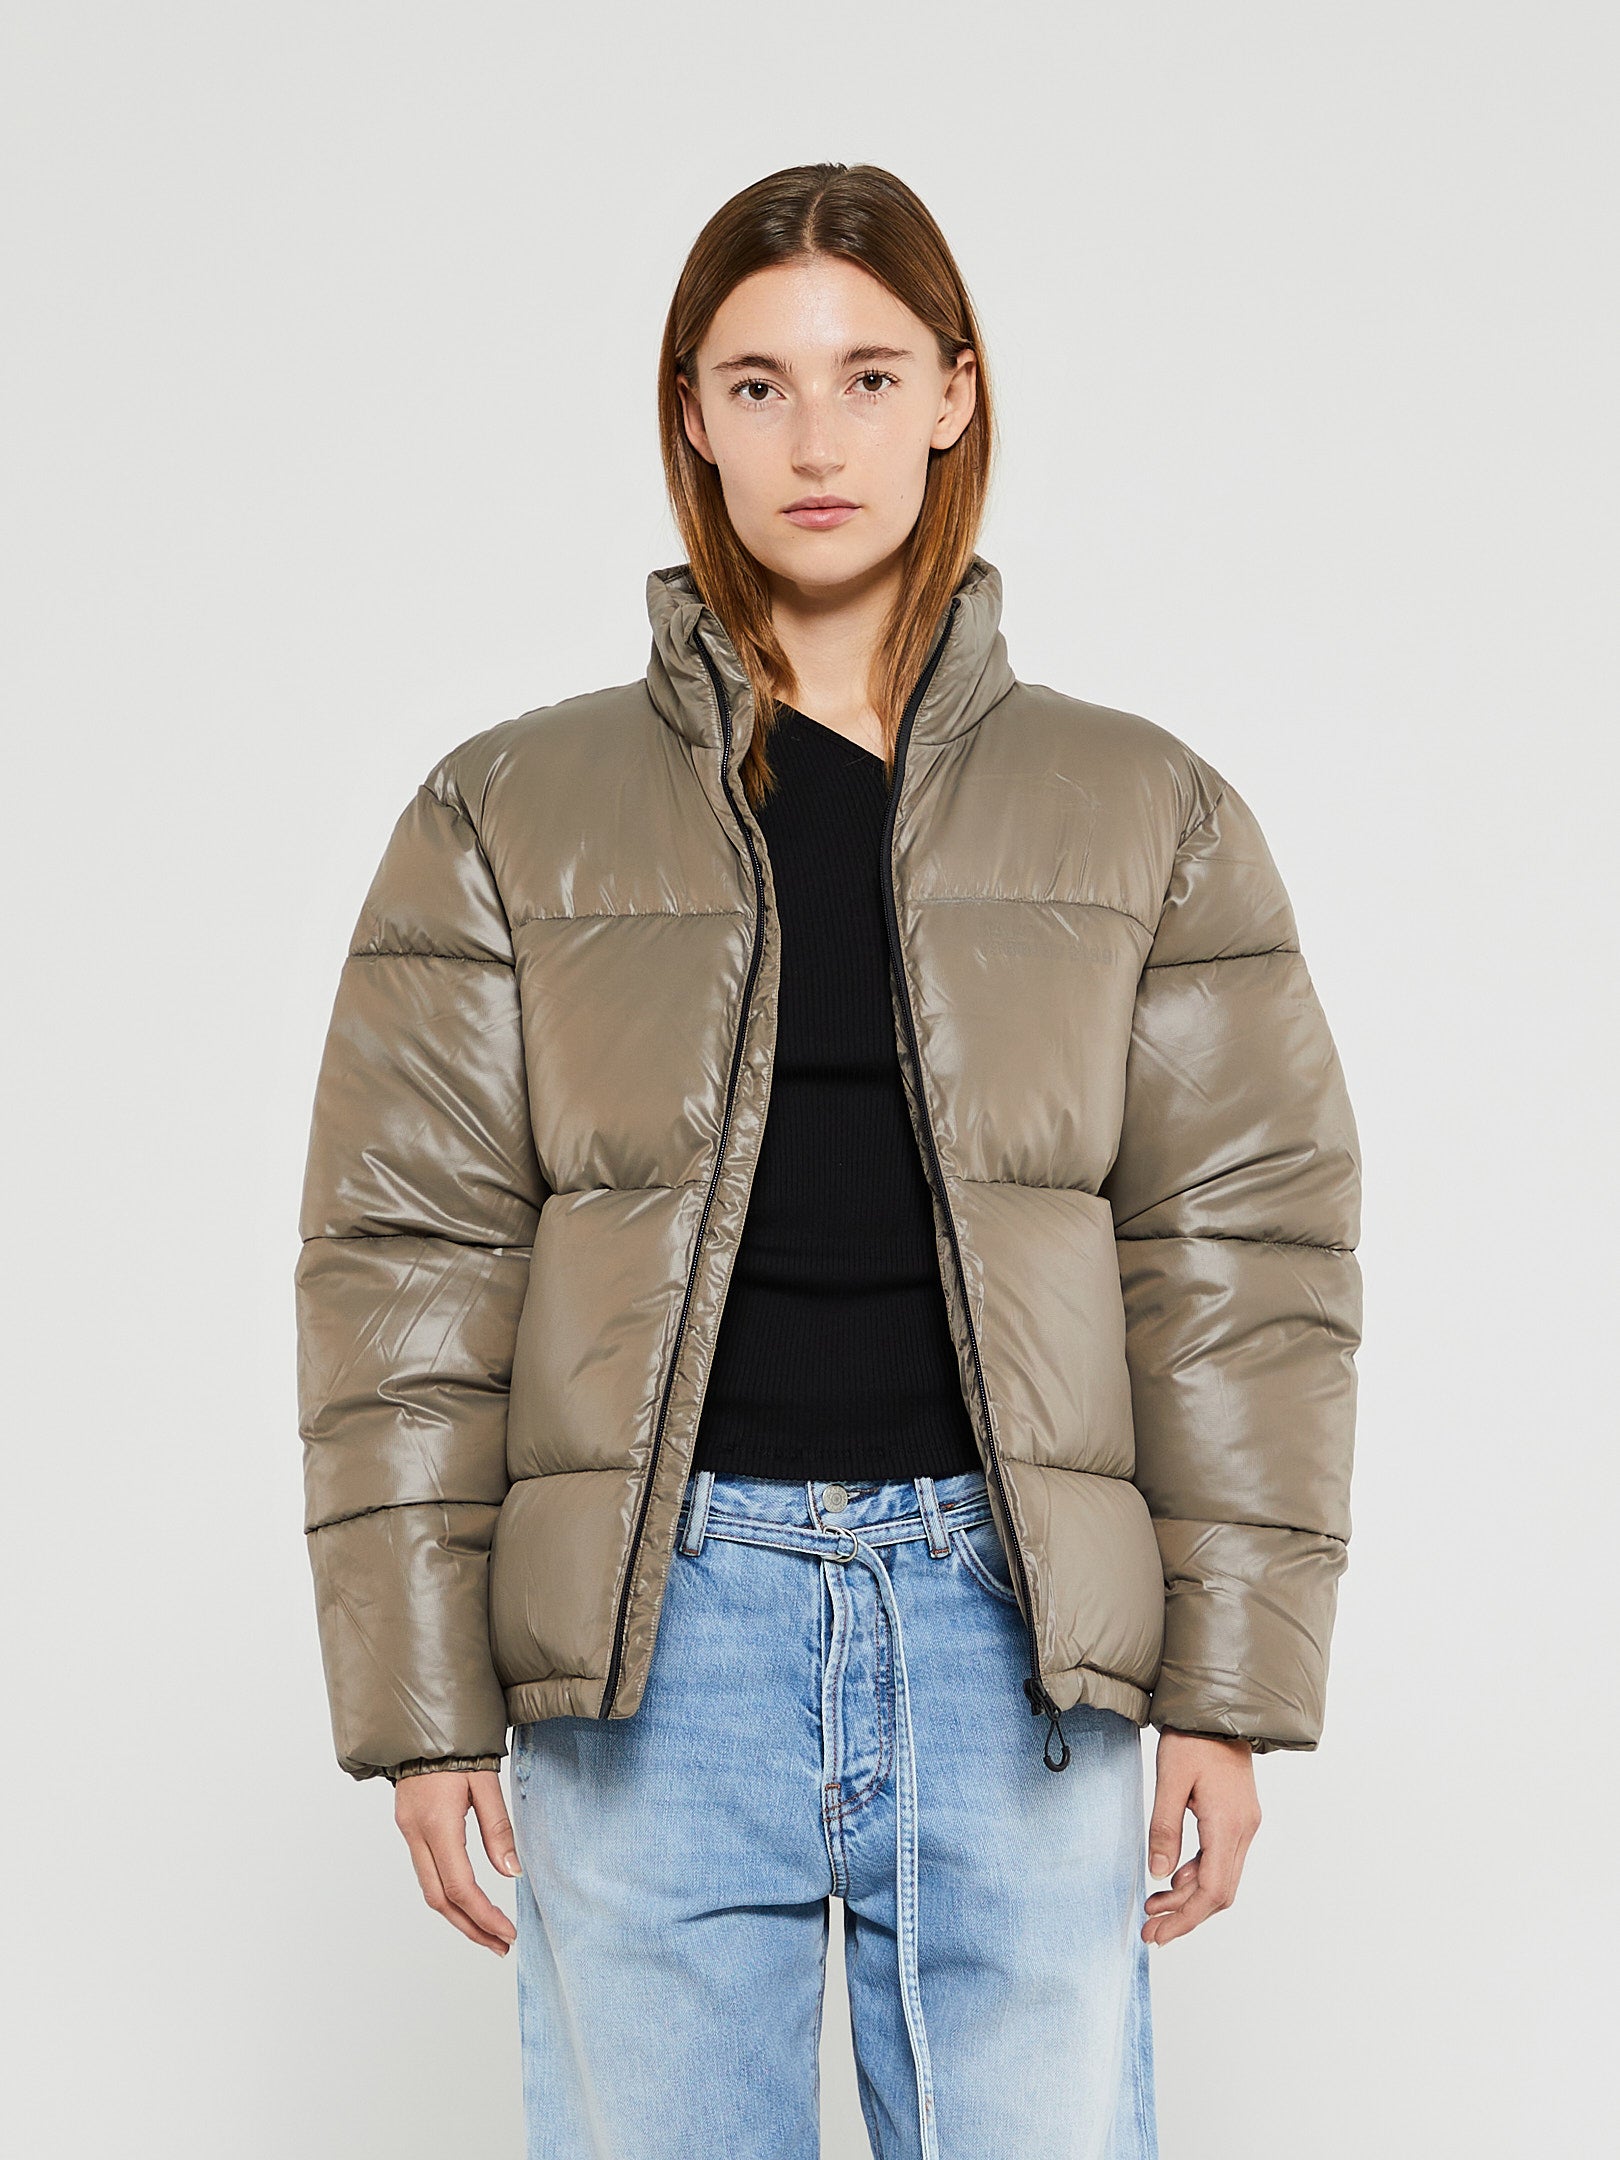 the stoy selection Shop | at & Coats women Jackets for